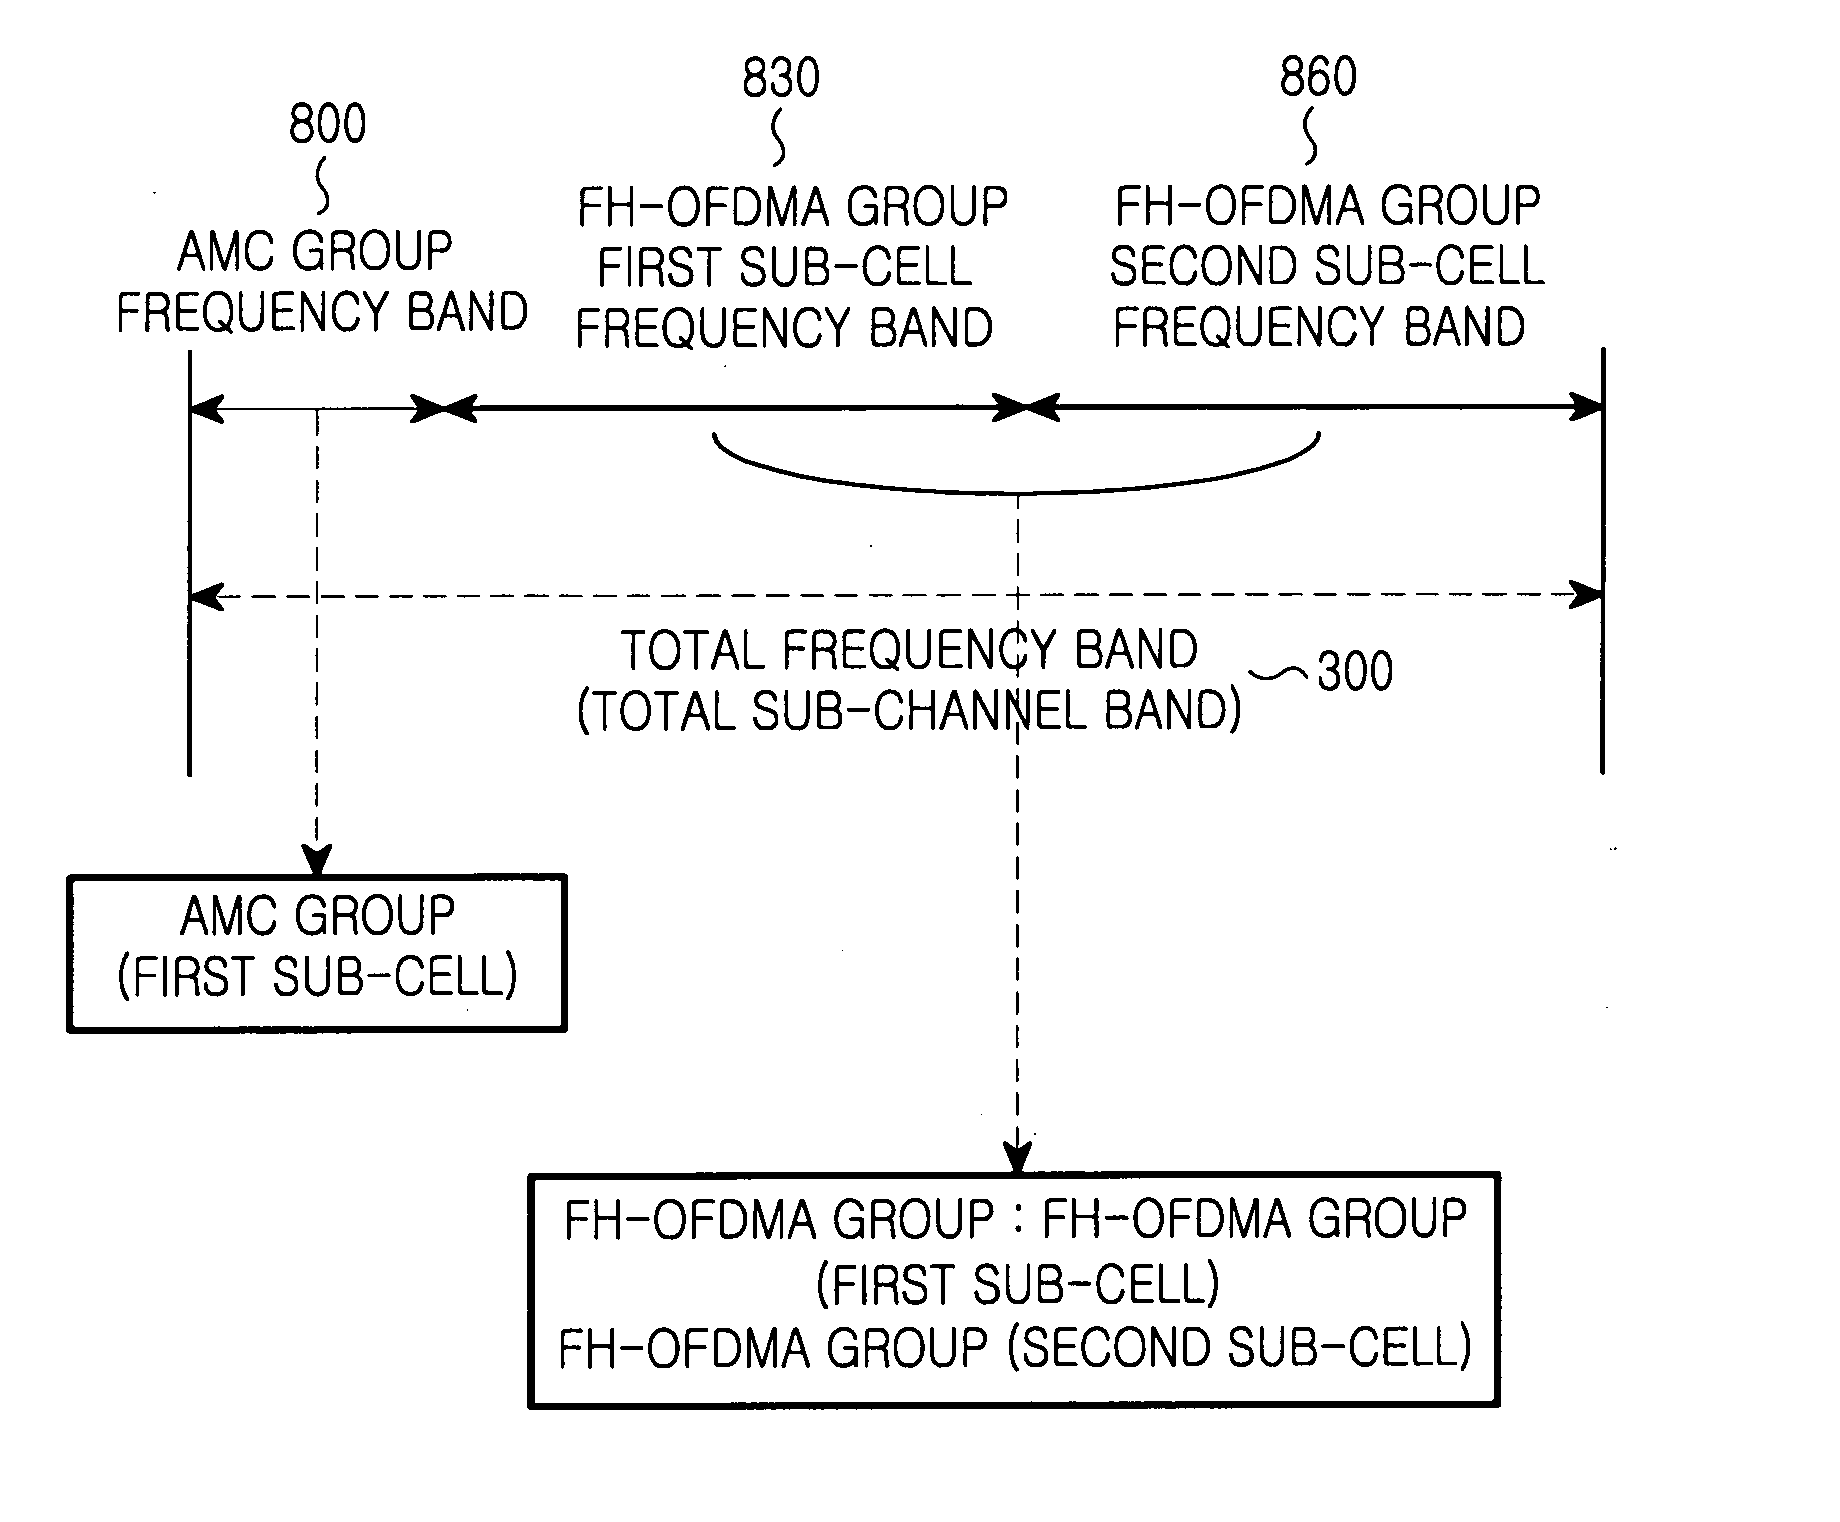 Method for transmitting a signal using a precise adaptive modulation and coding scheme in a frequency hopping-orthogonal frequency division multiple access communication system